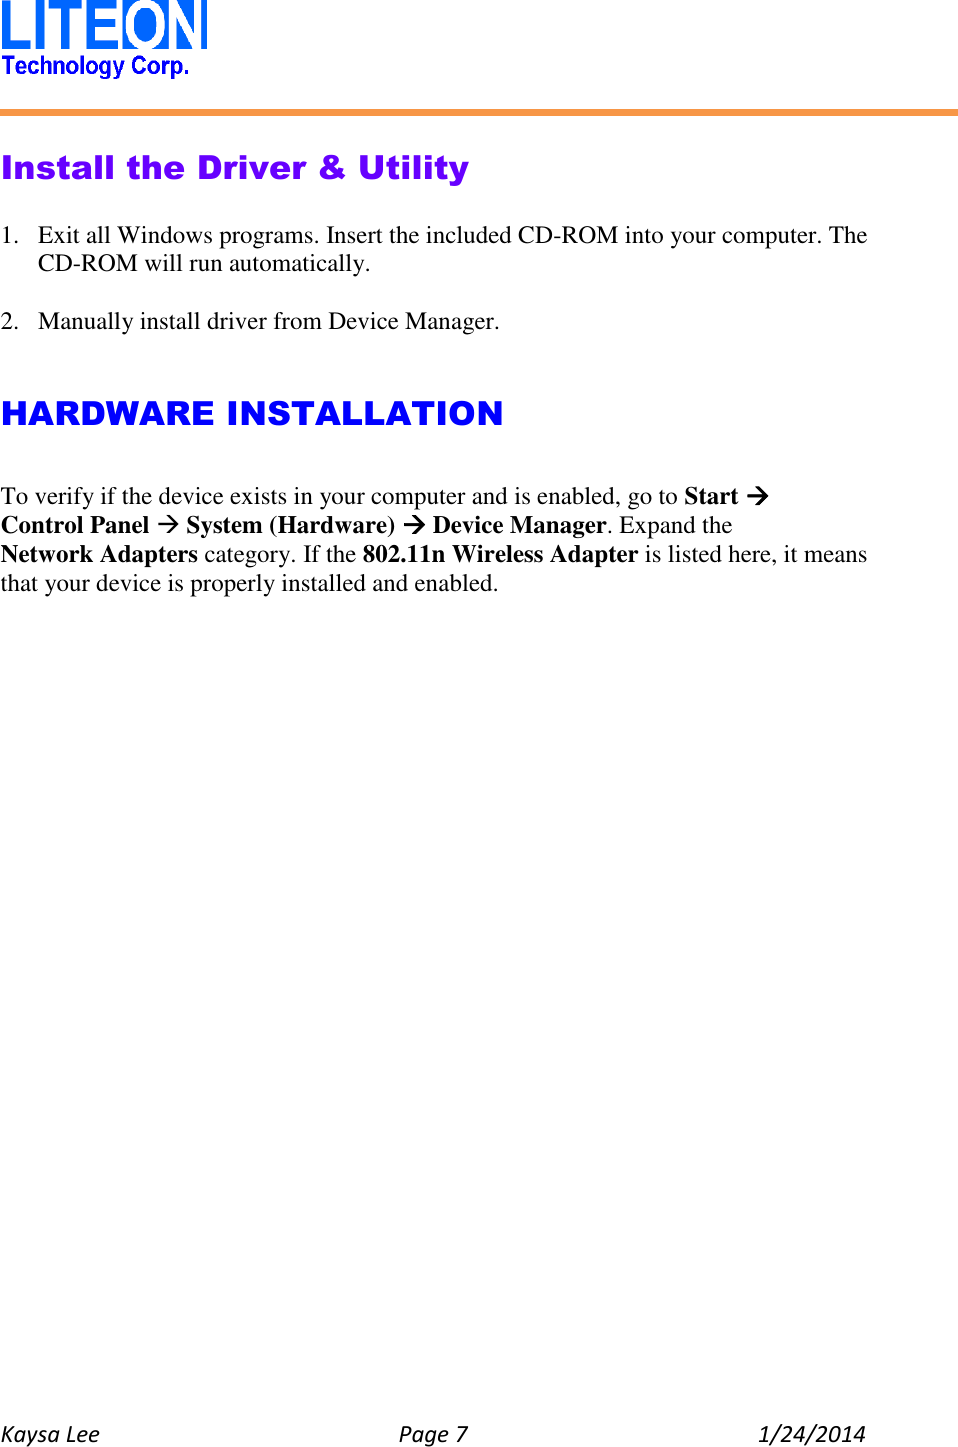   Kaysa Lee  Page 7  1/24/2014    Install the Driver &amp; Utility  1. Exit all Windows programs. Insert the included CD-ROM into your computer. The CD-ROM will run automatically.  2. Manually install driver from Device Manager.   HARDWARE INSTALLATION  To verify if the device exists in your computer and is enabled, go to Start  Control Panel  System (Hardware)  Device Manager. Expand the Network Adapters category. If the 802.11n Wireless Adapter is listed here, it means that your device is properly installed and enabled.    